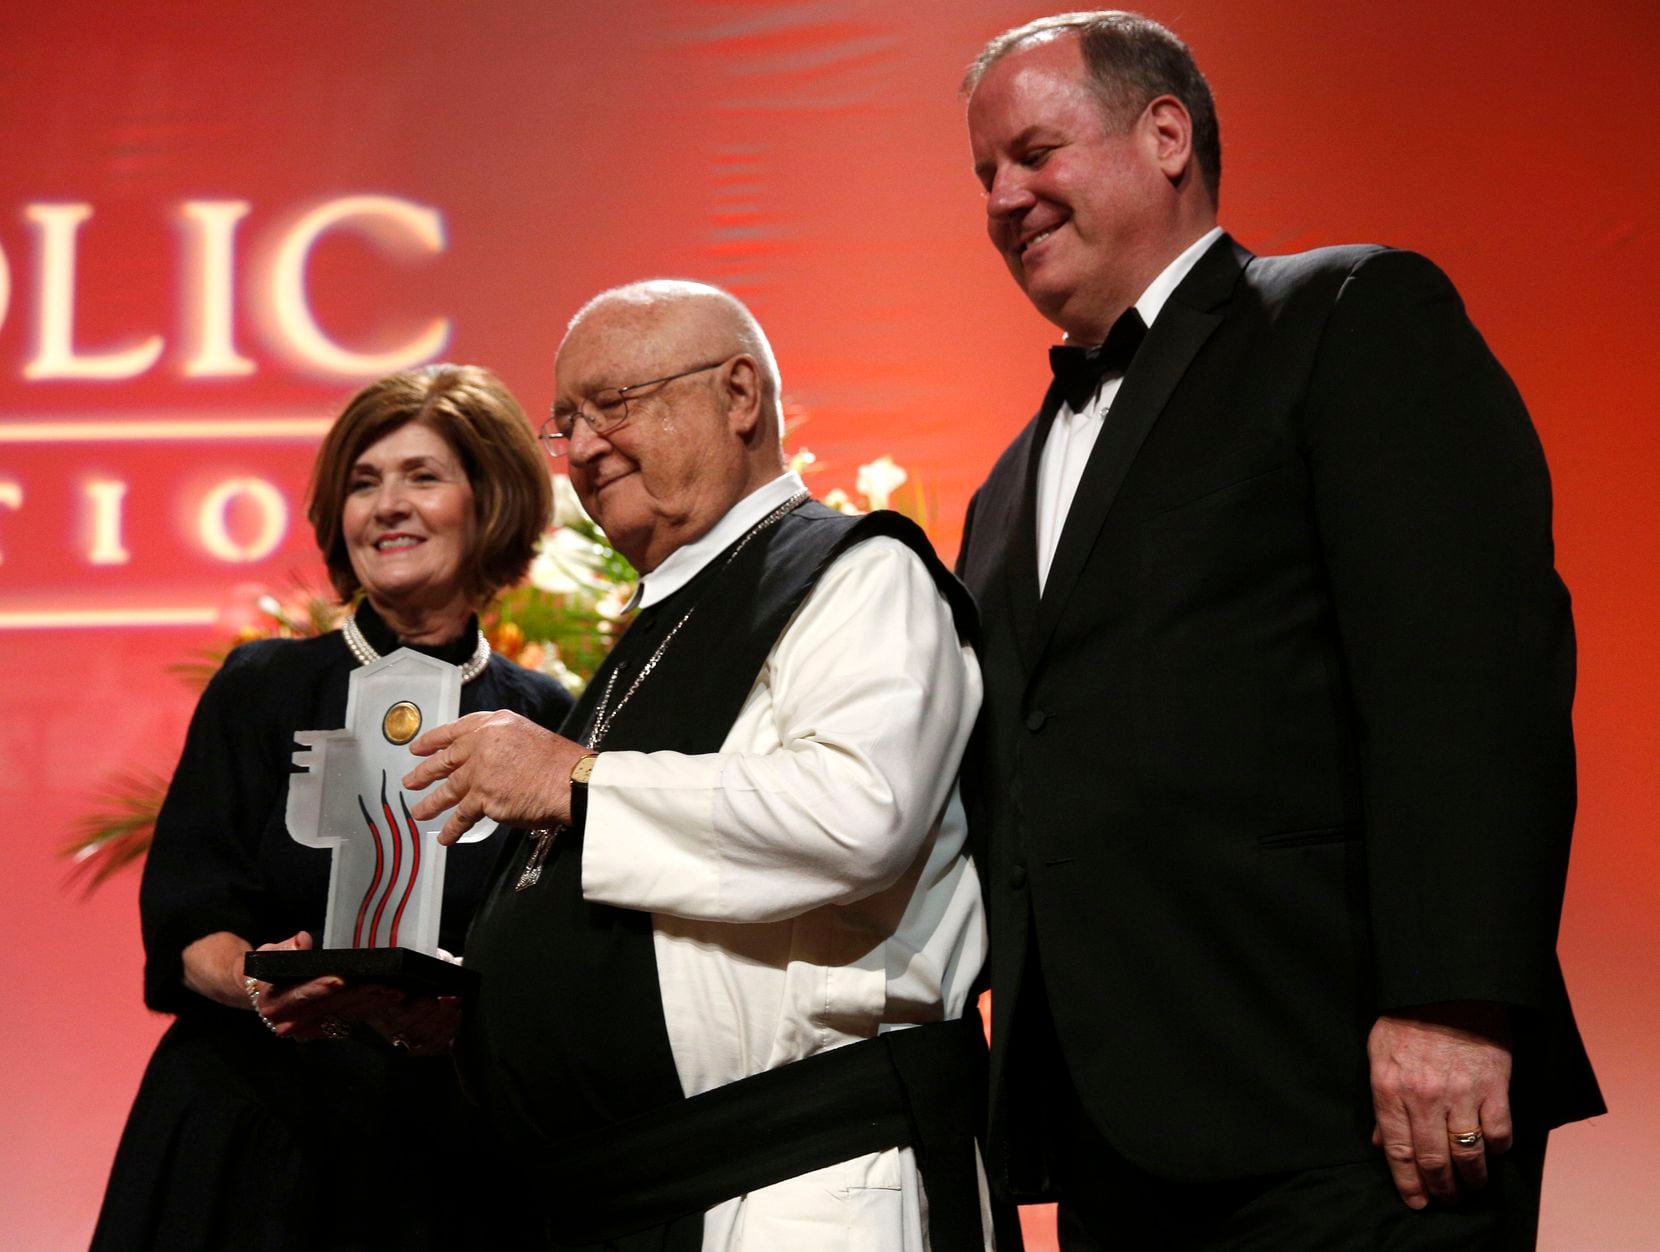 The Rev. Denis Farkasfalvy accepts the honoree award from Victoria Lattner, chairman of the board of trustees for The Catholic Foundation, and Matthew Kramer, president and CEO of The Catholic Foundation, during the group's 2016 award dinner in Dallas.